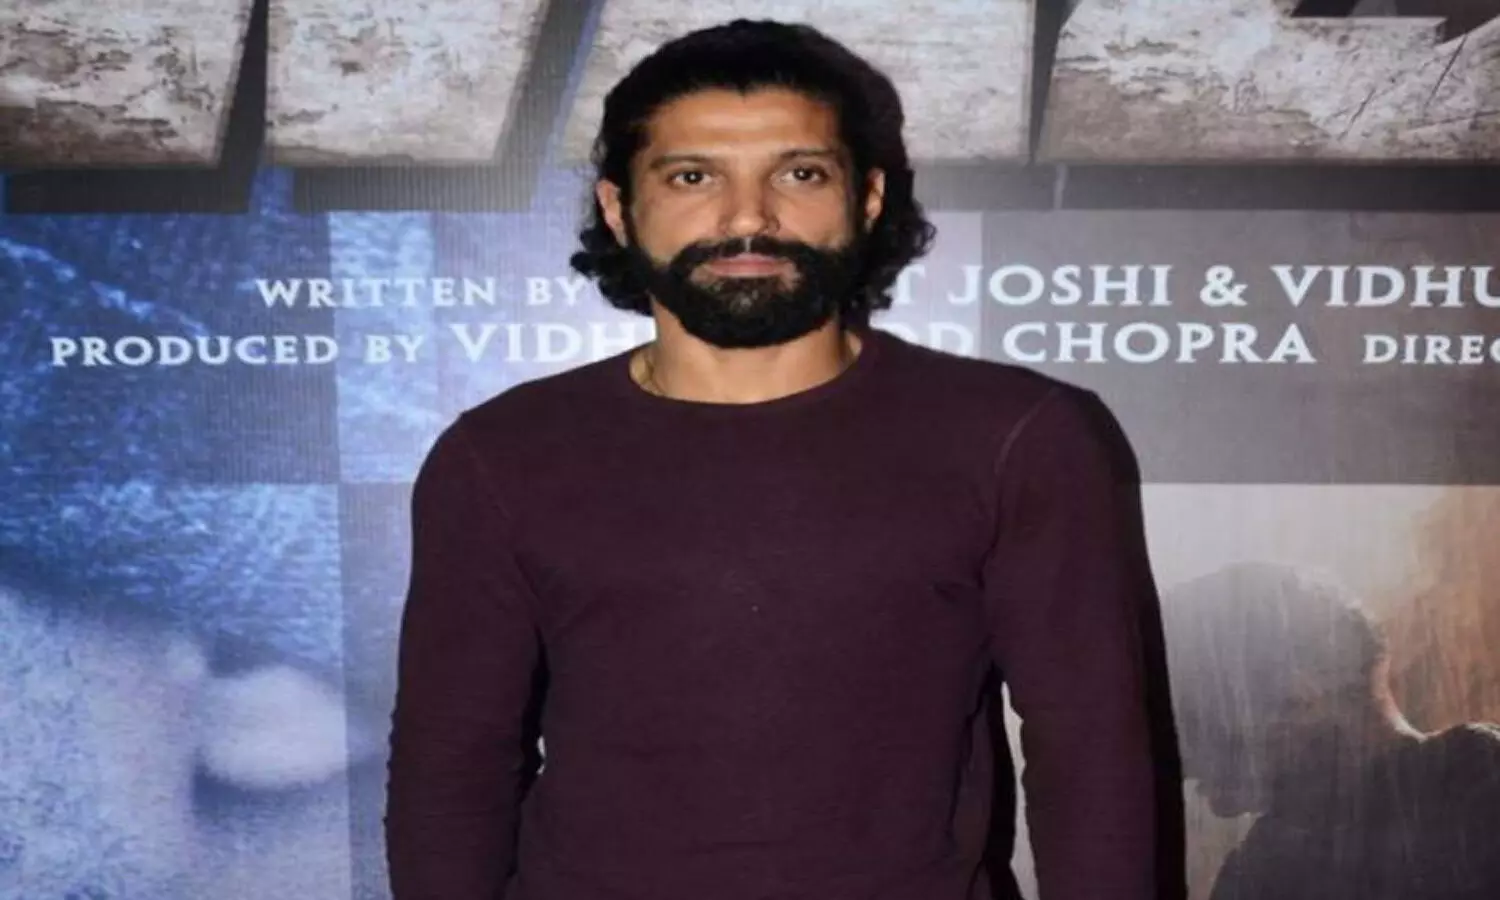 Farhan Akhtar criticised for using drive-in vaccination facility, actor hits back at netizen